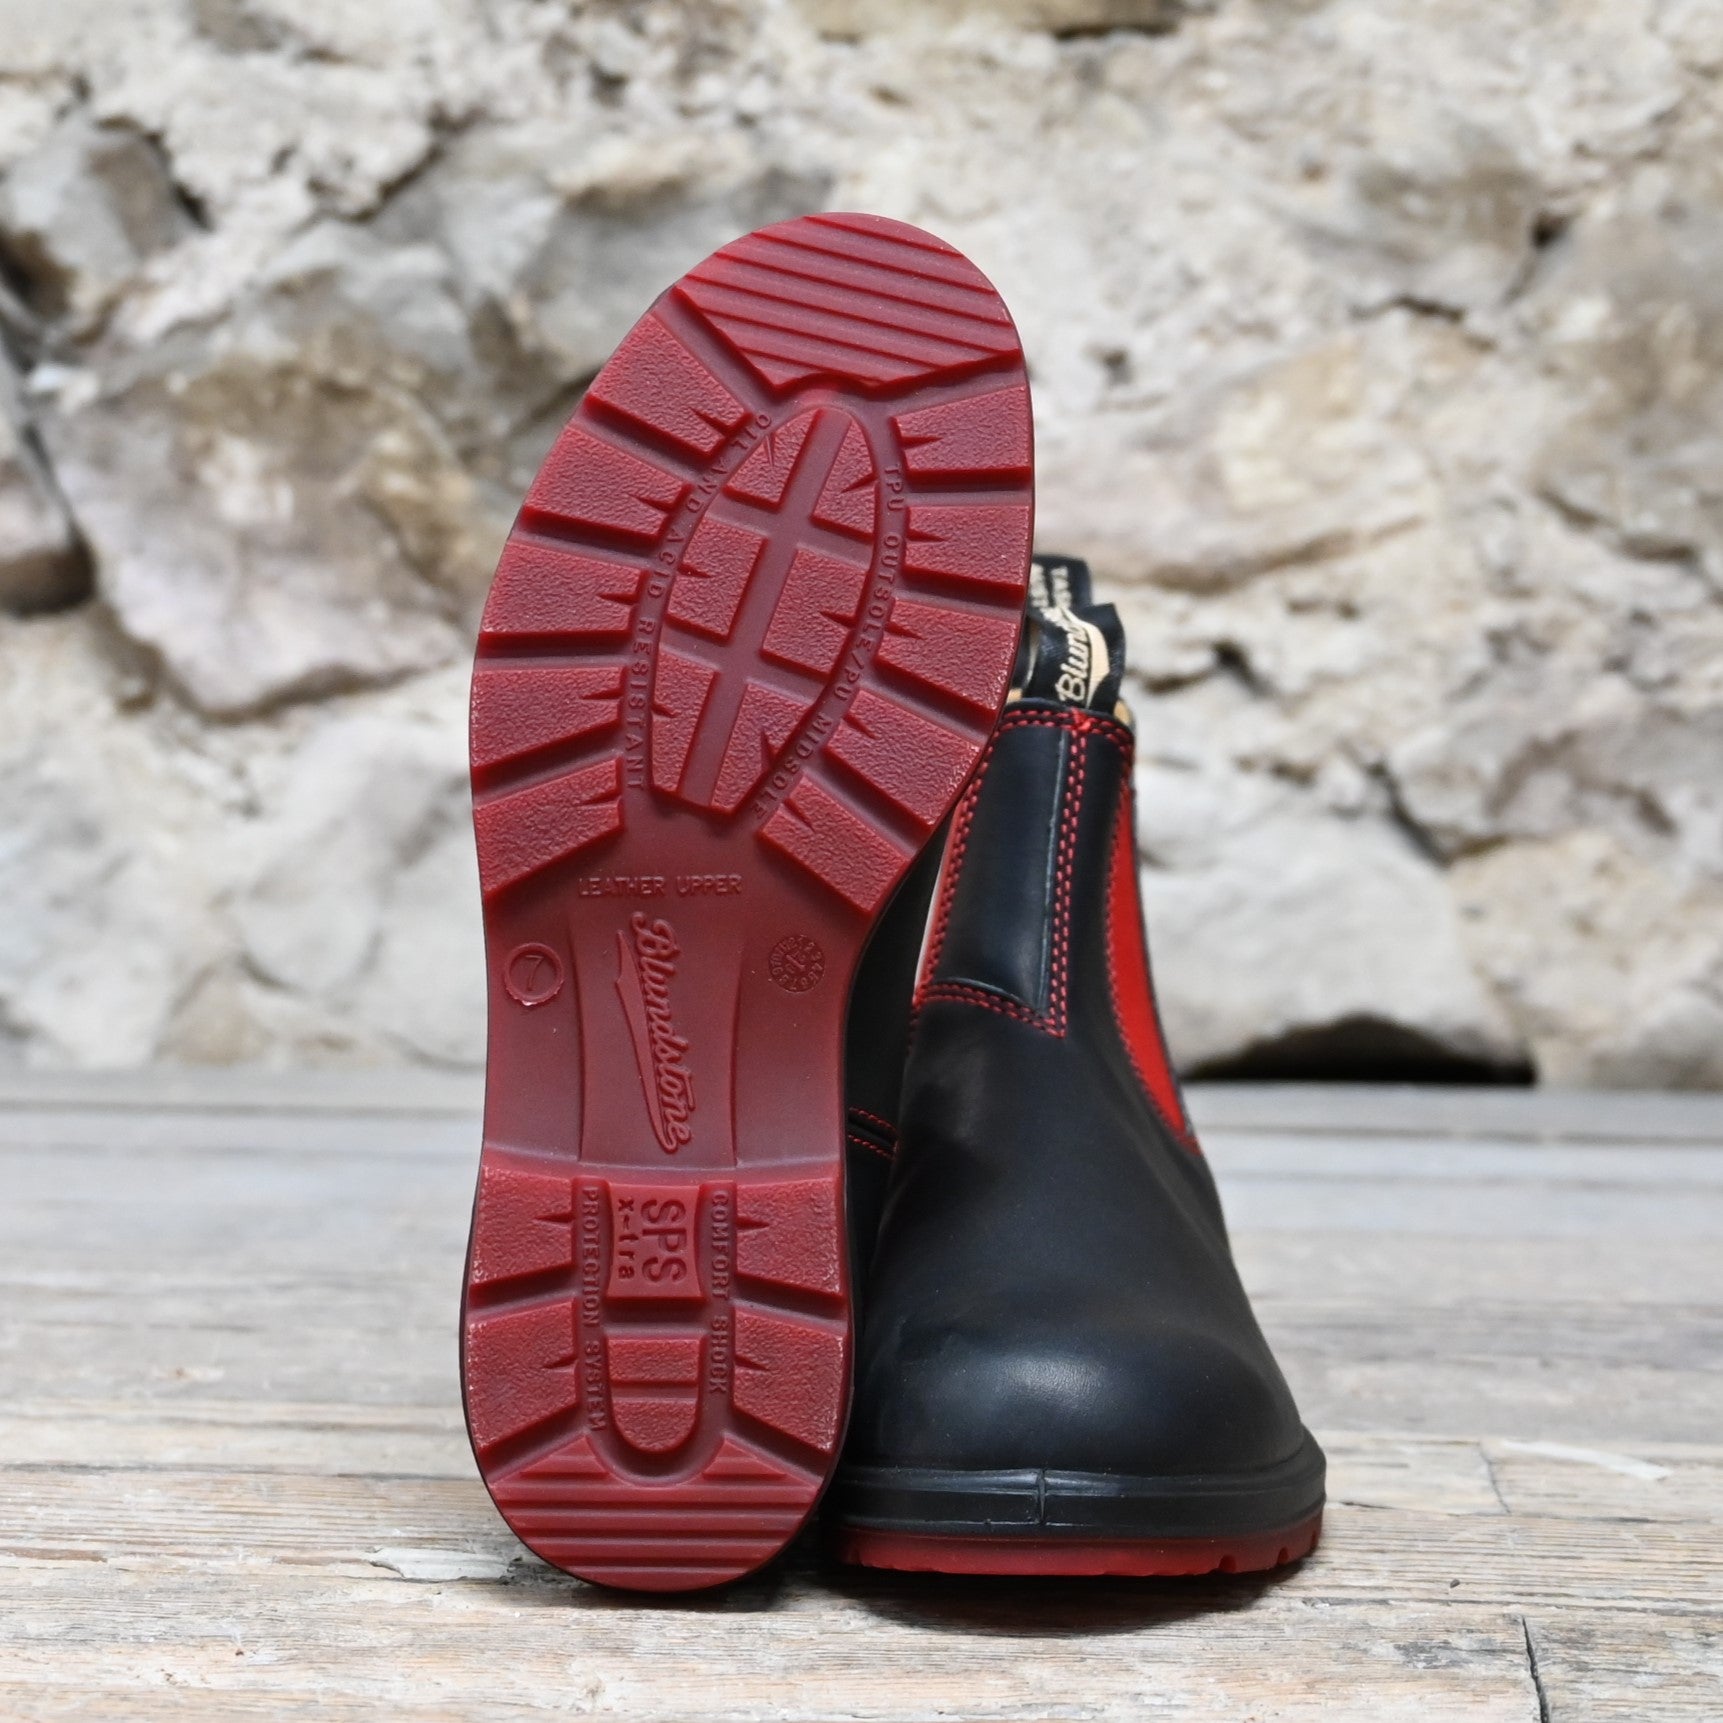 Blundstone Slip On In Black Premium Leather With Red Elastic And Red  Outsole.